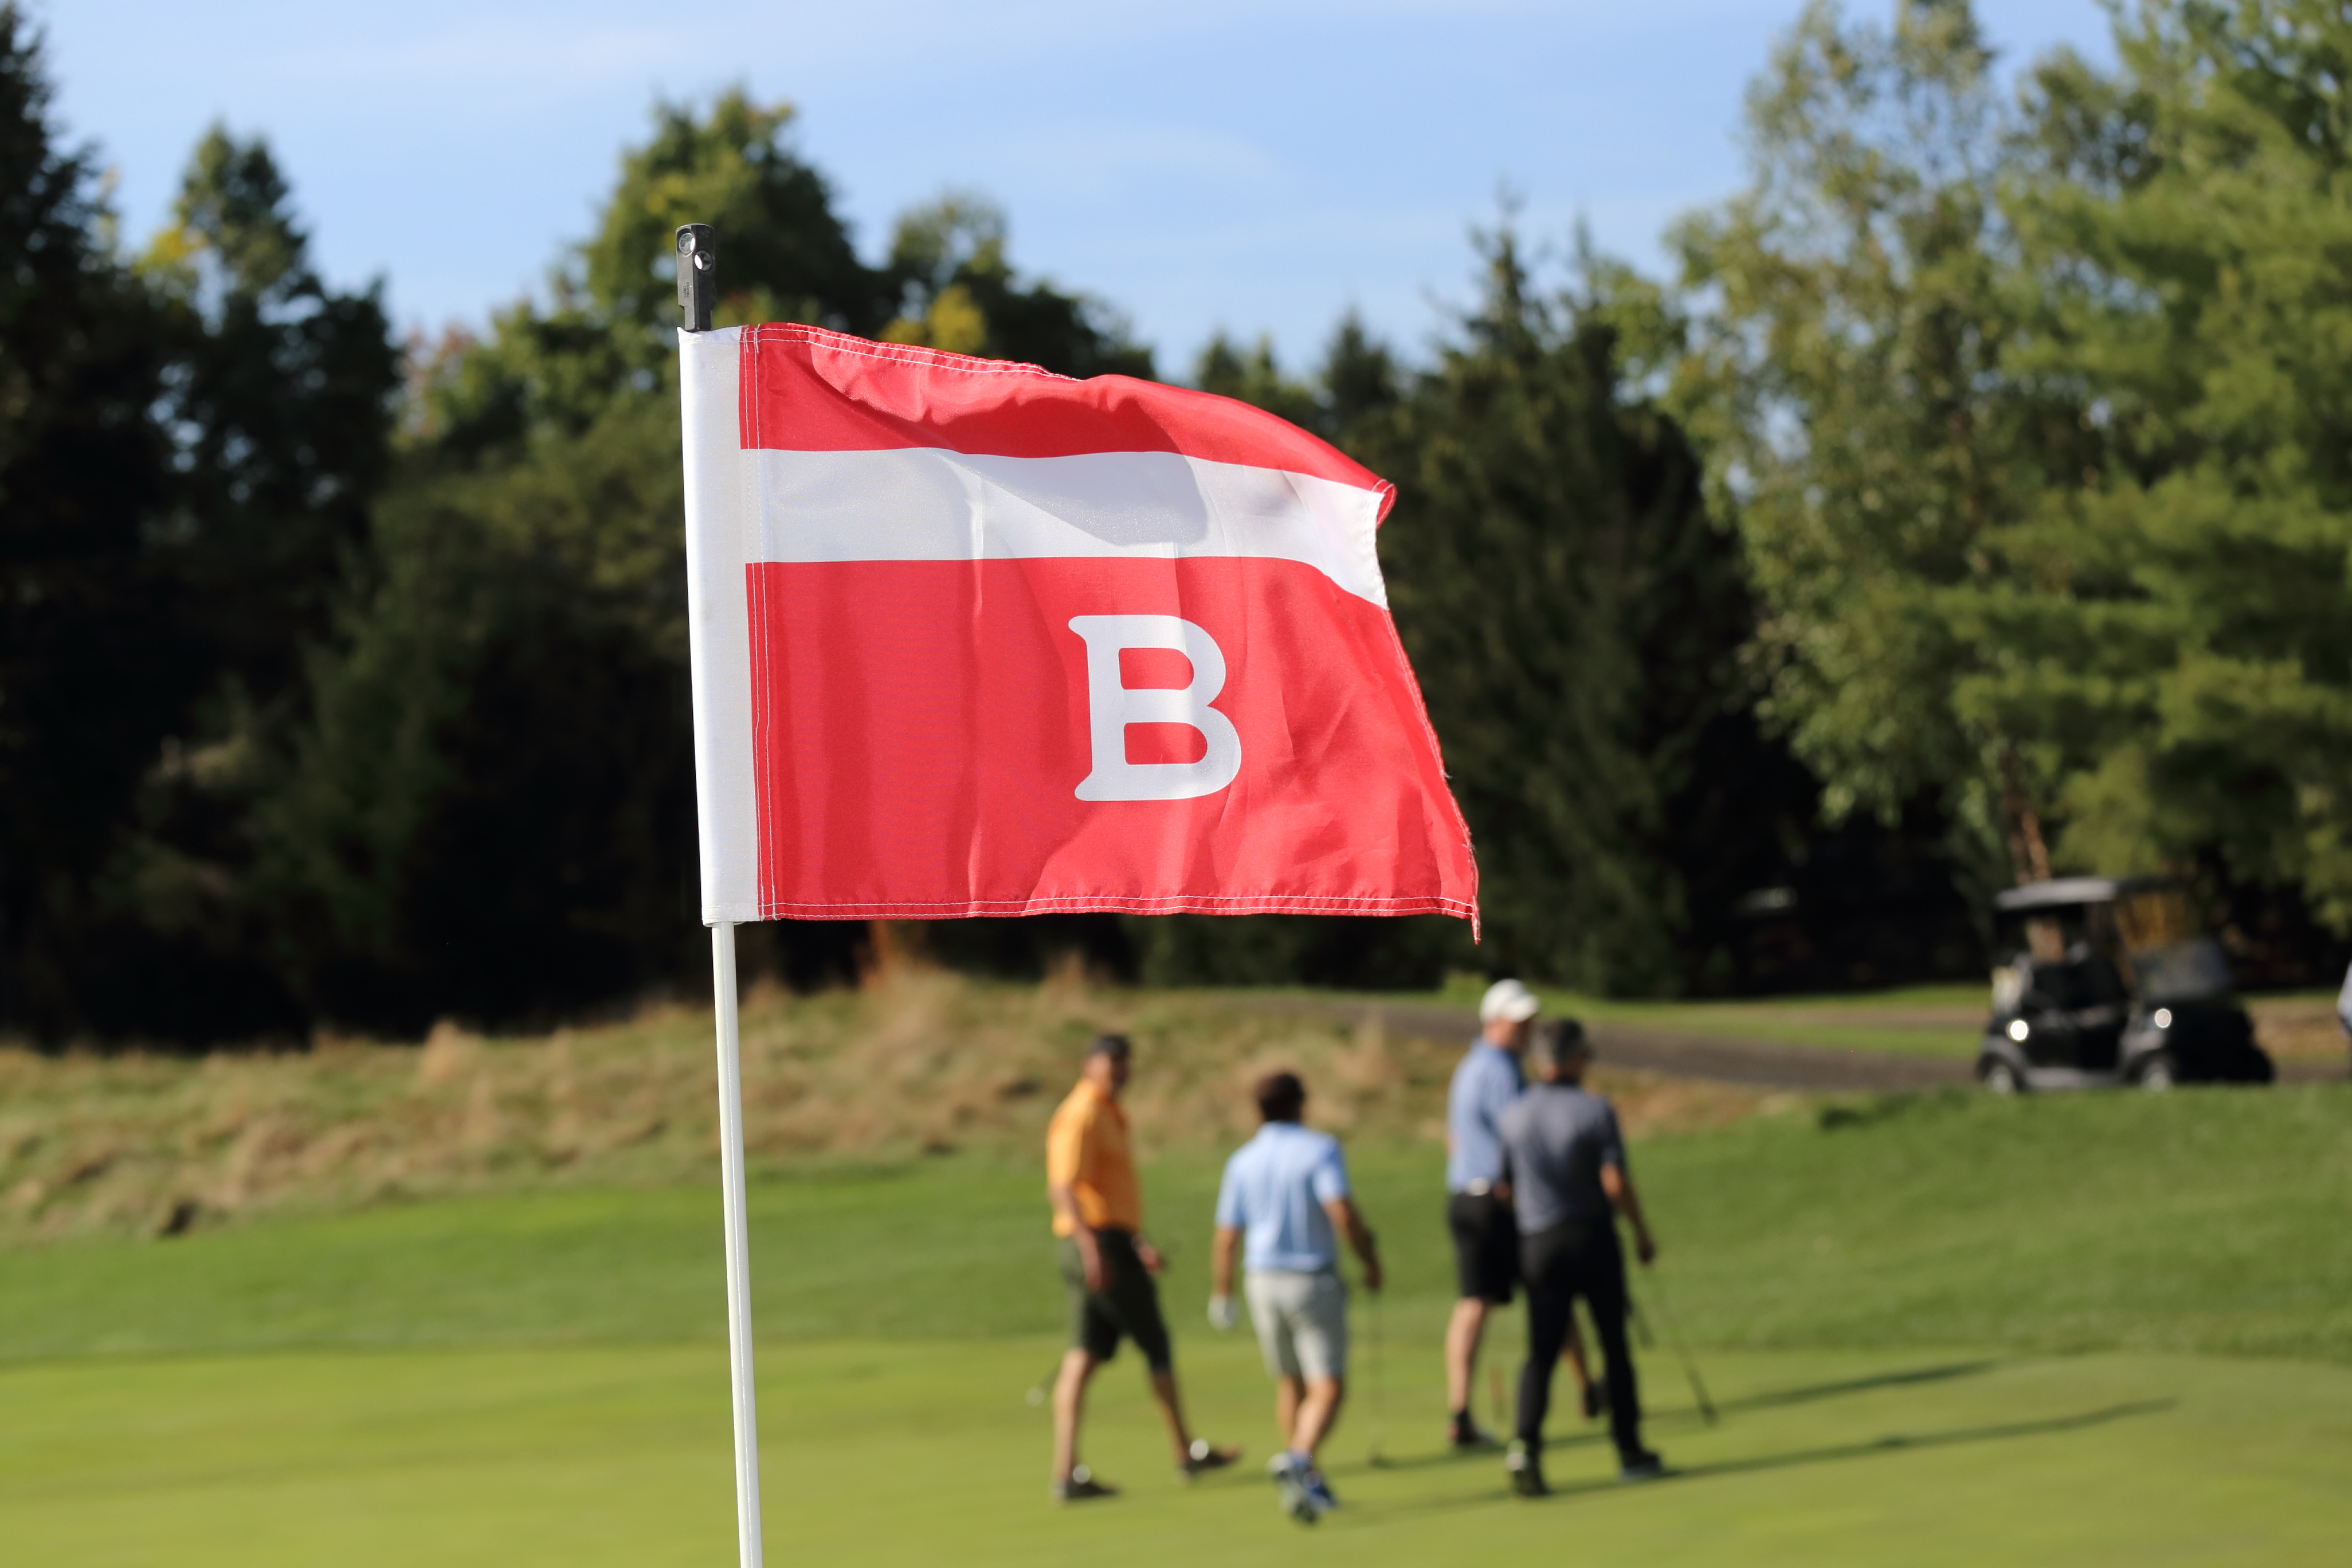 An Alex. Brown flag at the second annual Alex. Brown invitational at the Manhattan Woods Golf Club in West Nyack, New York on Sept. 27.